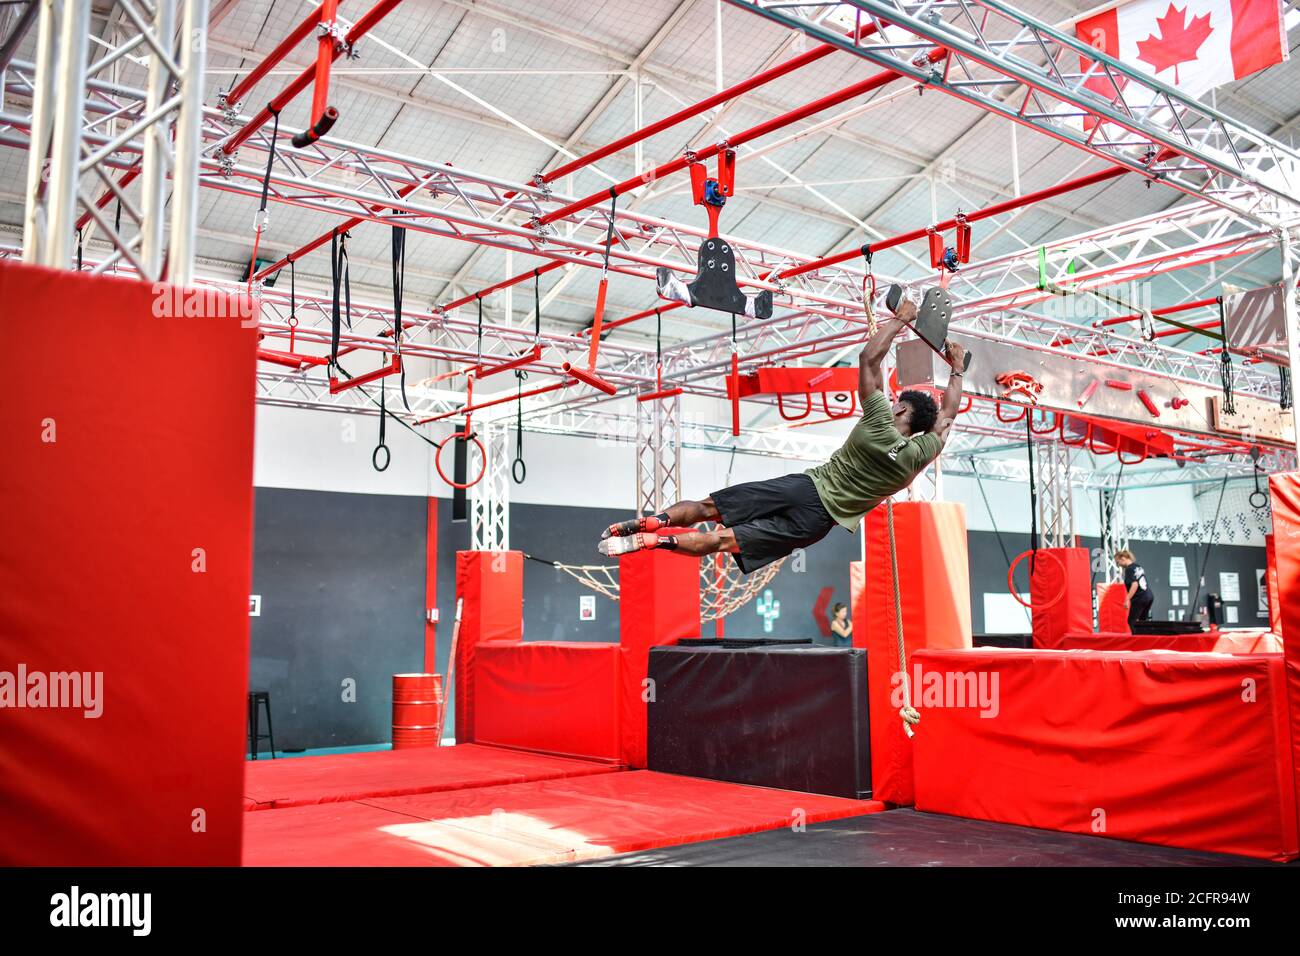 Villeurbanne (central-eastern France): Warrior Adventure Sports Complex. Participant doing an indoor obstacle course race inspired by the TV show 'Nin Stock Photo